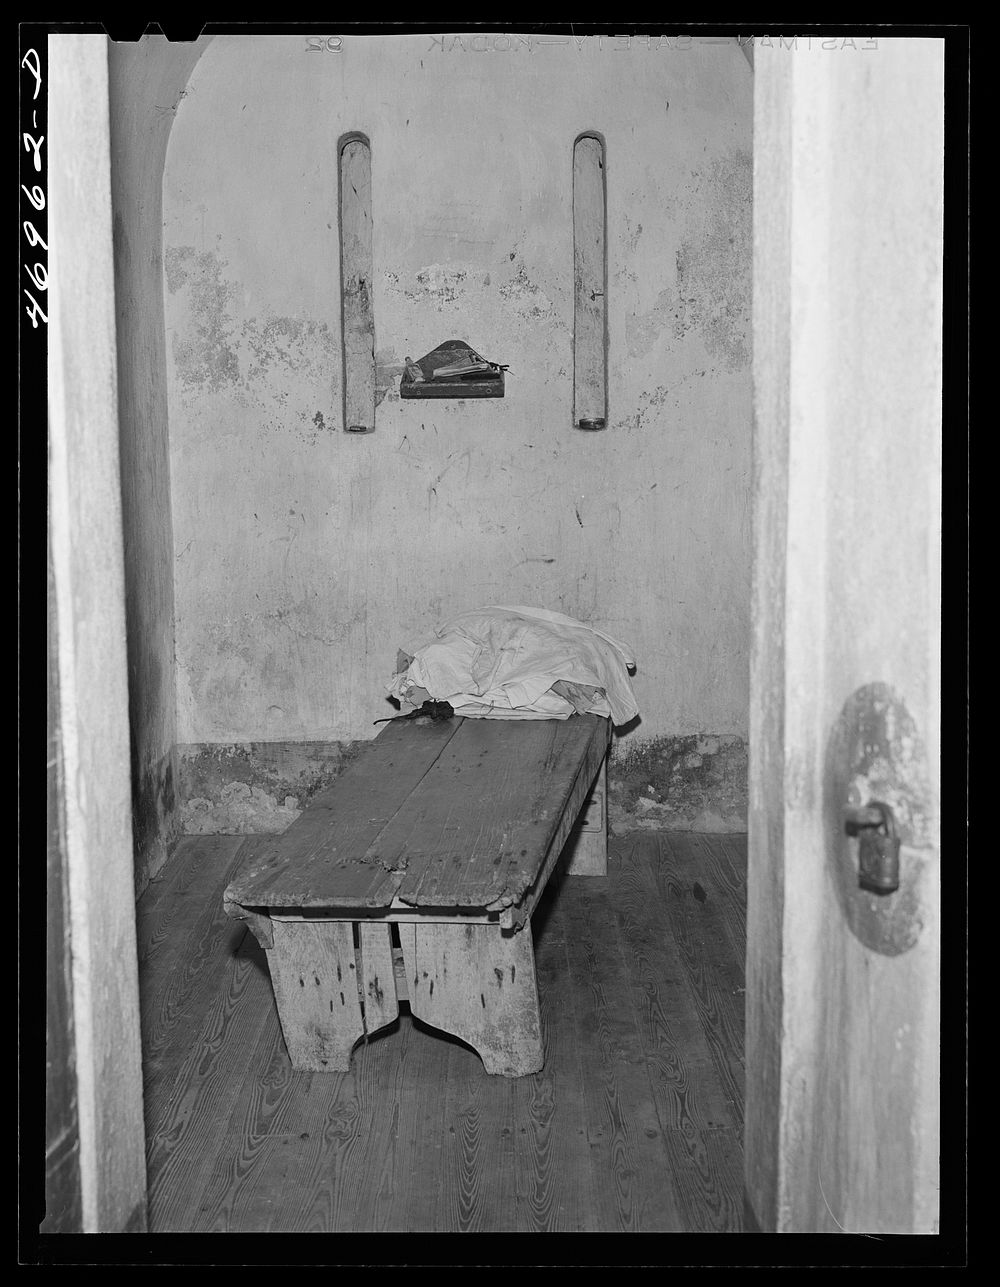 Christiansted, Saint Croix Island, Virgin Islands. A cell in the prison. Sourced from the Library of Congress.